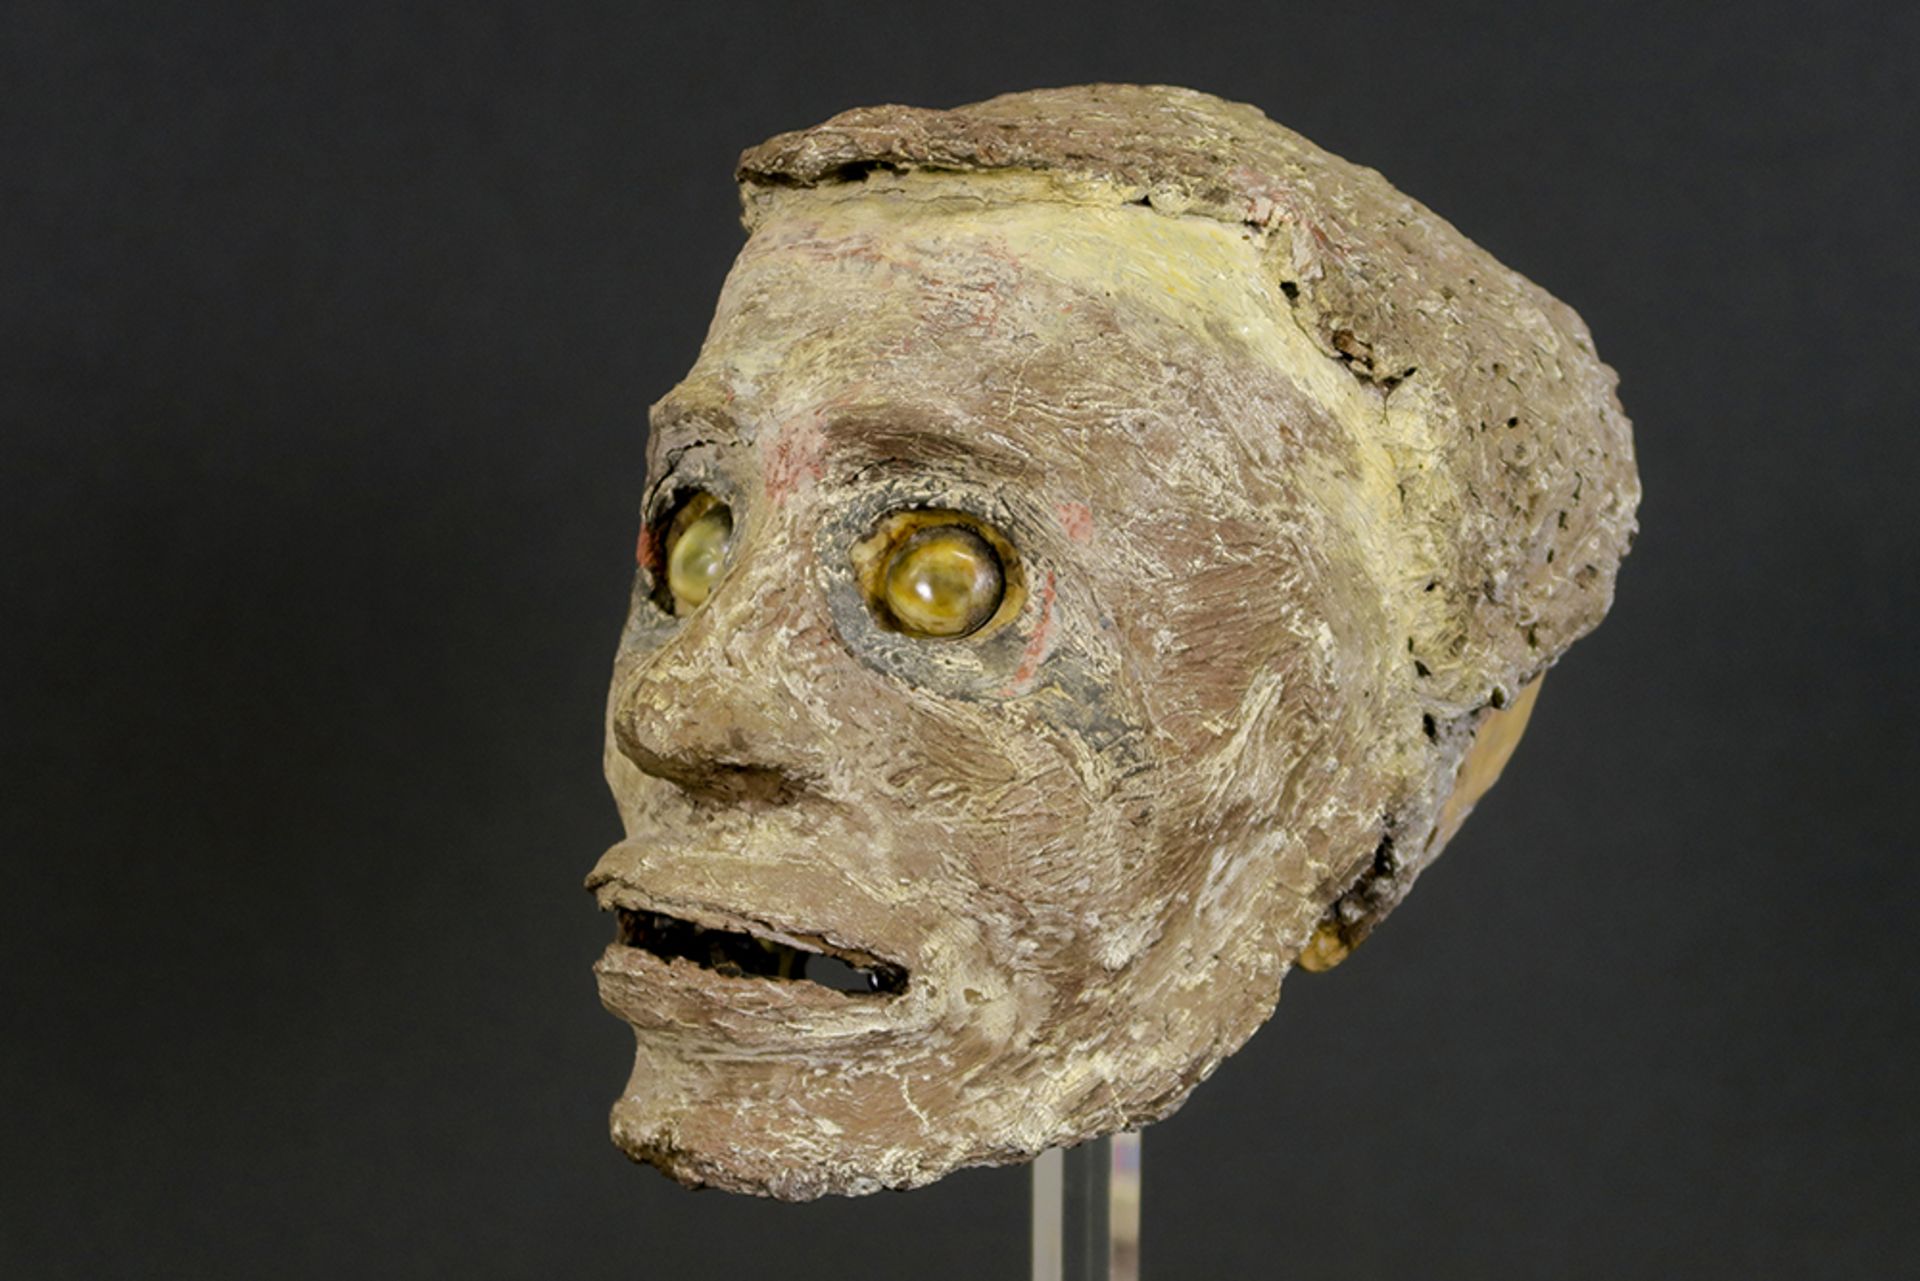 20th Cent. Oceanian sculpture with an overmodeled skull with shell inlaid eyes || OCEANIË - 20° EEUW